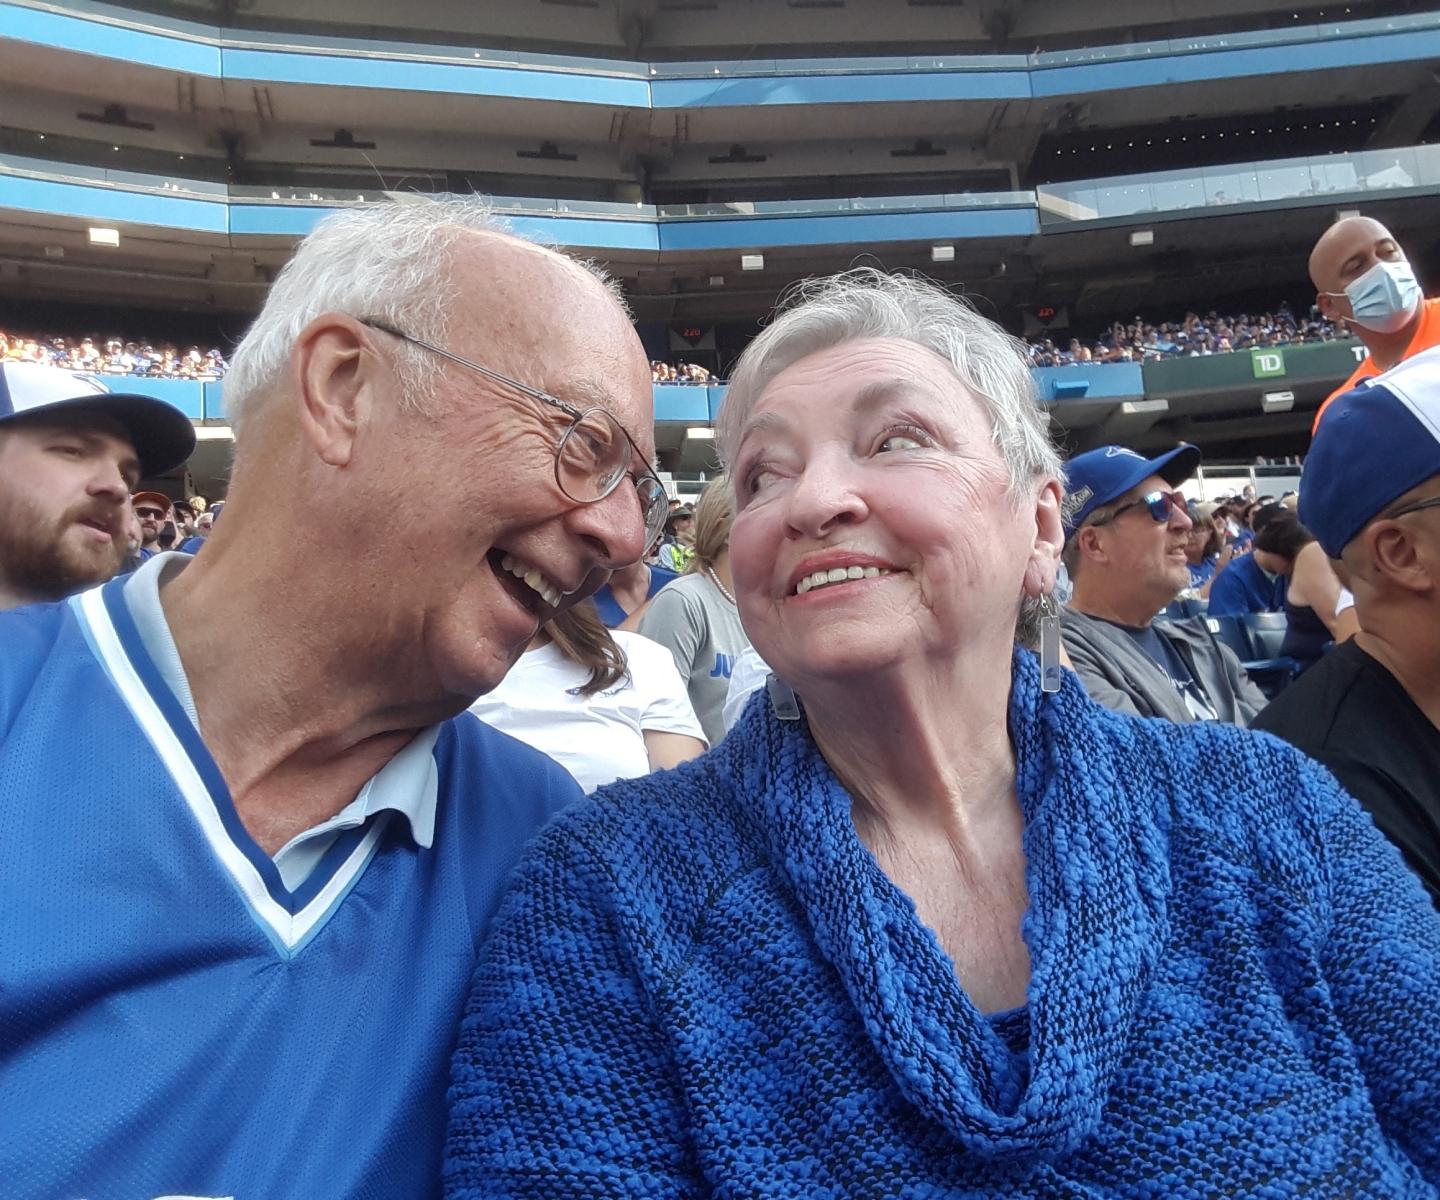 Husband and wife smiling together at baseball game